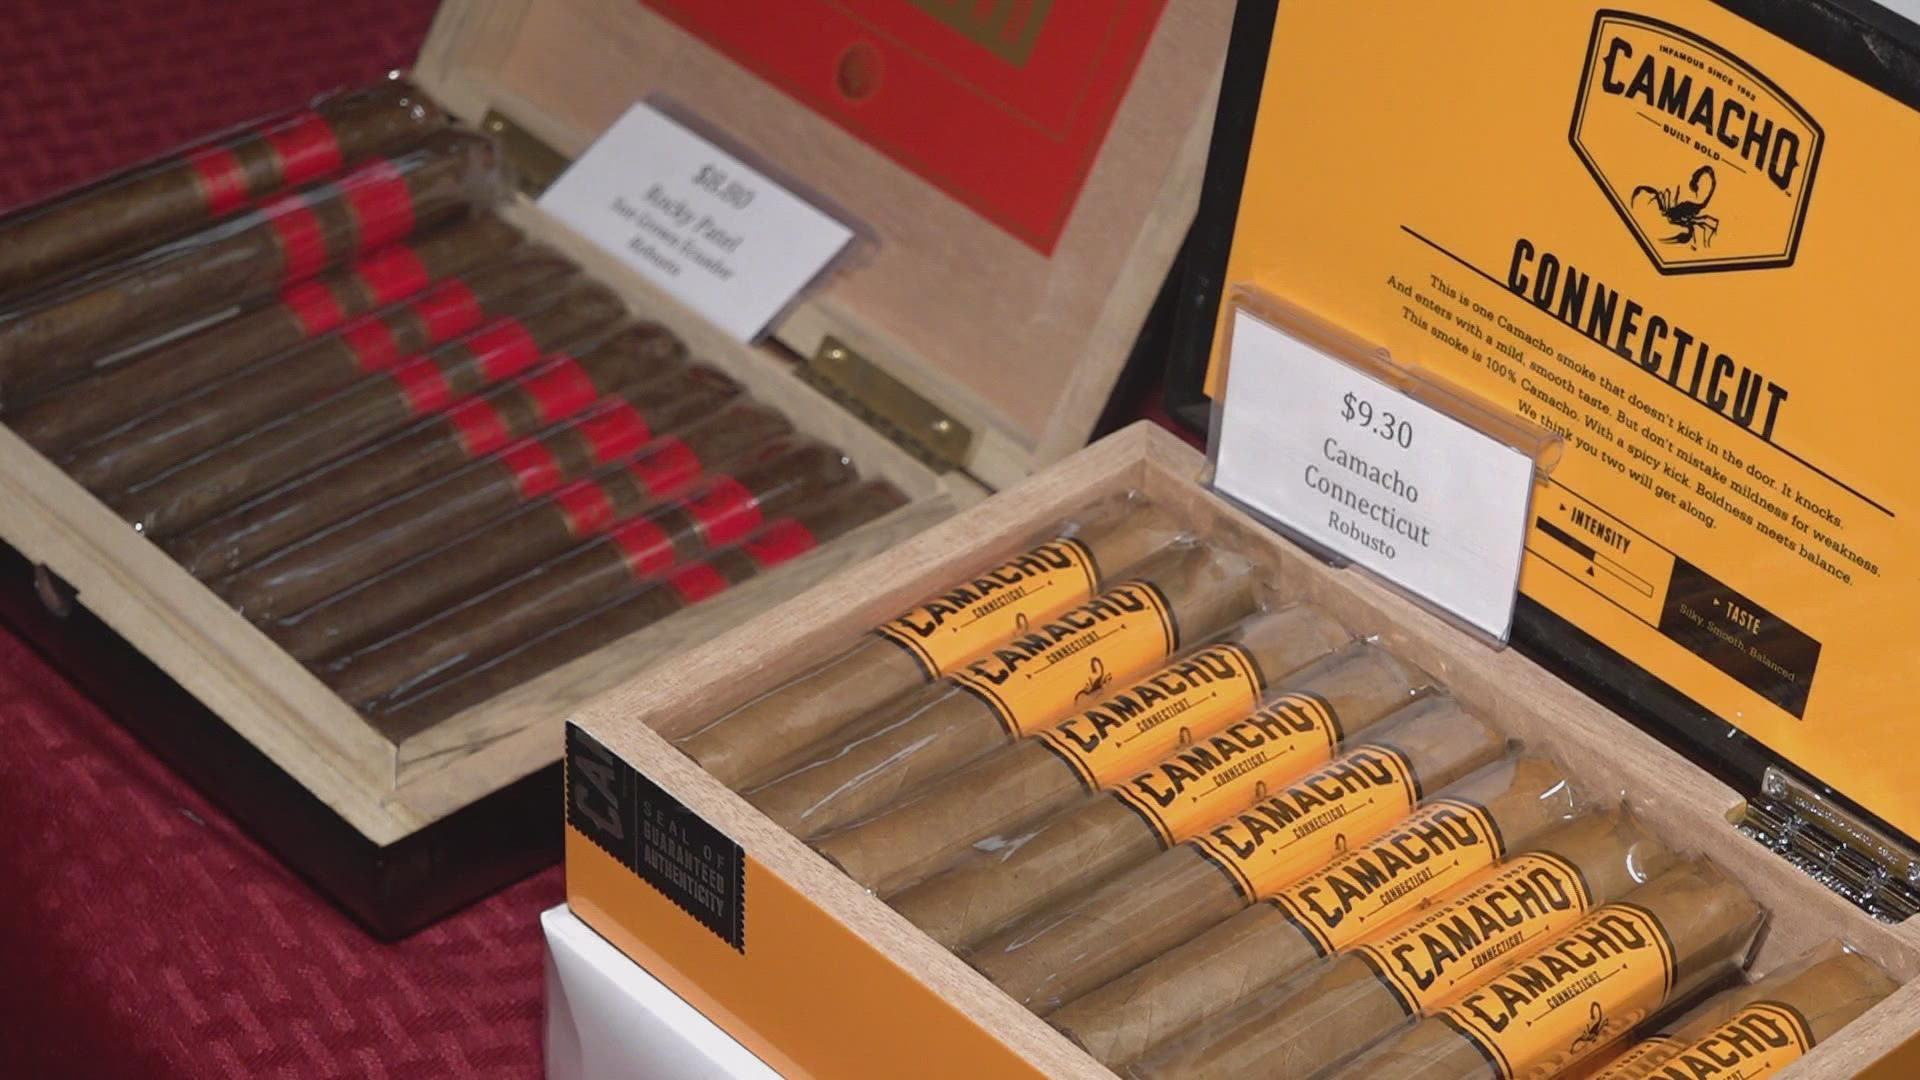 Smoky's Cigars in west Knoxville talks about their rocket-high sales as Vol nation prepares for the upcoming rivalry games against Alabama this weekend.